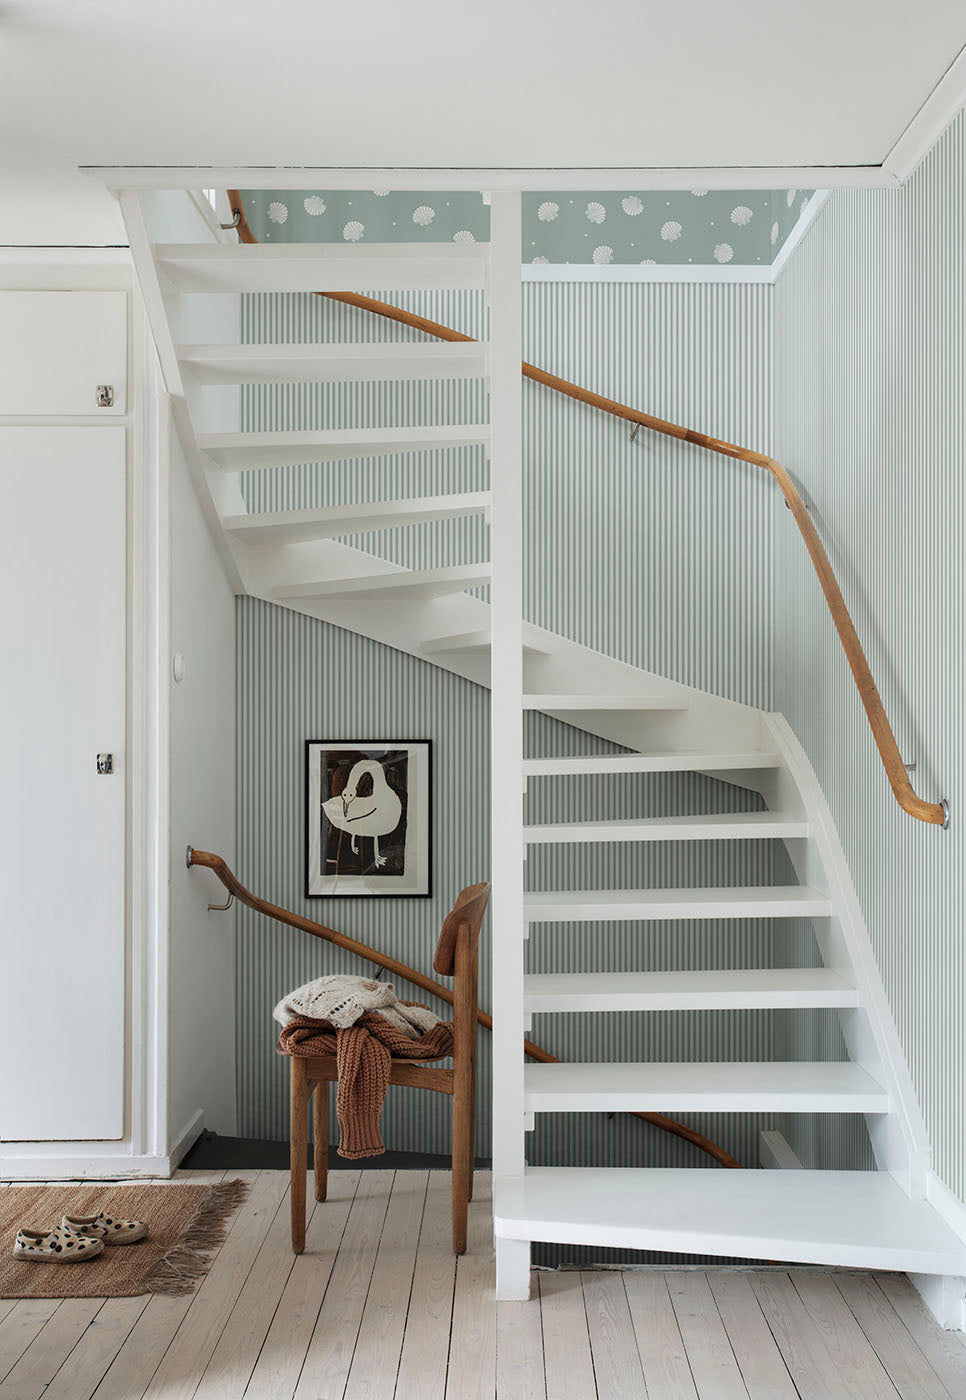 Creative Wallpaper ideas for stairs area